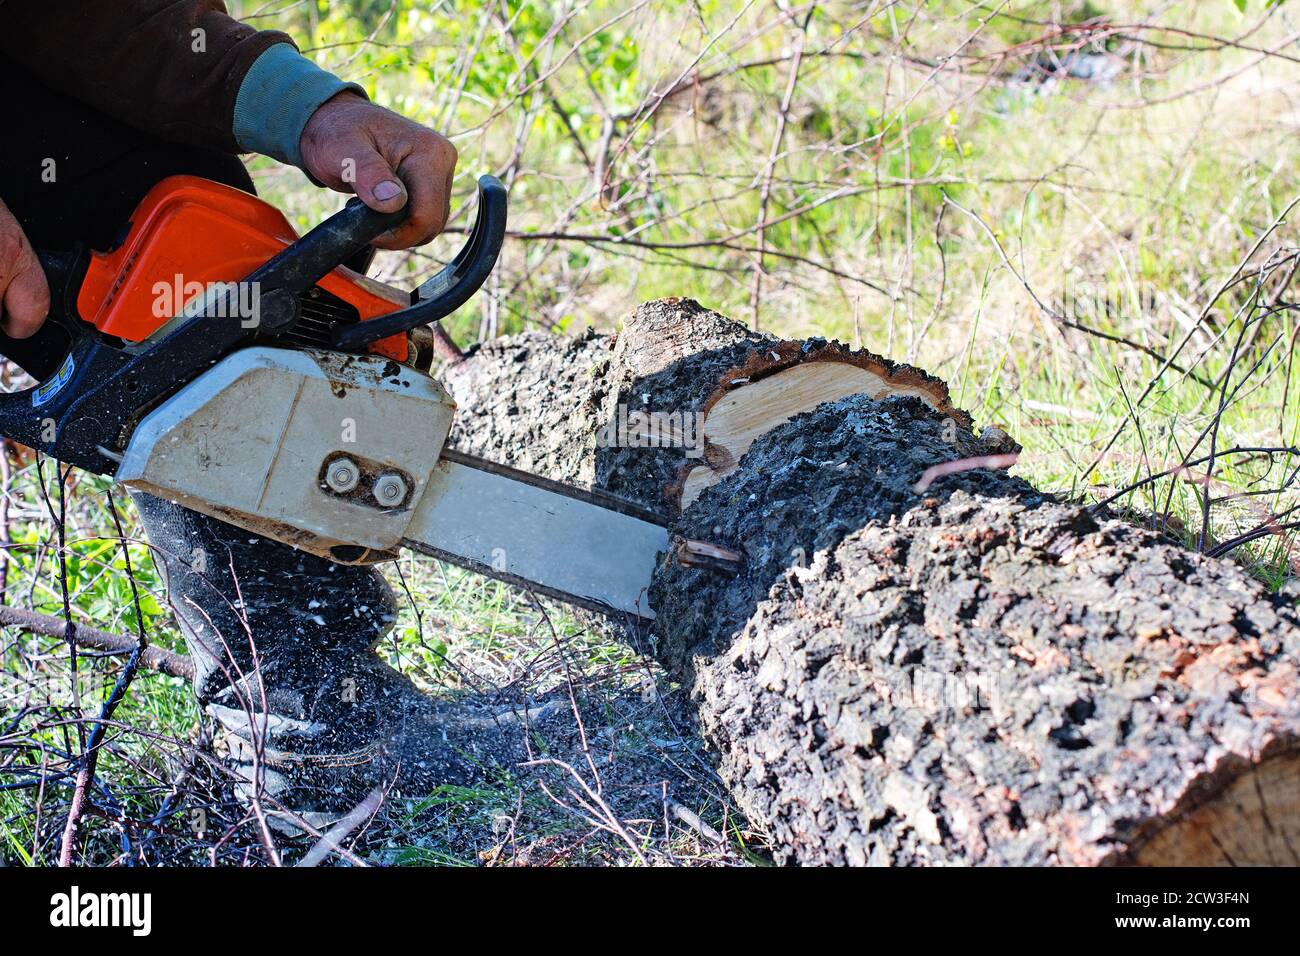 Lumberman sawing branches with a chainsaw from a felled tree in forest Stock Photo